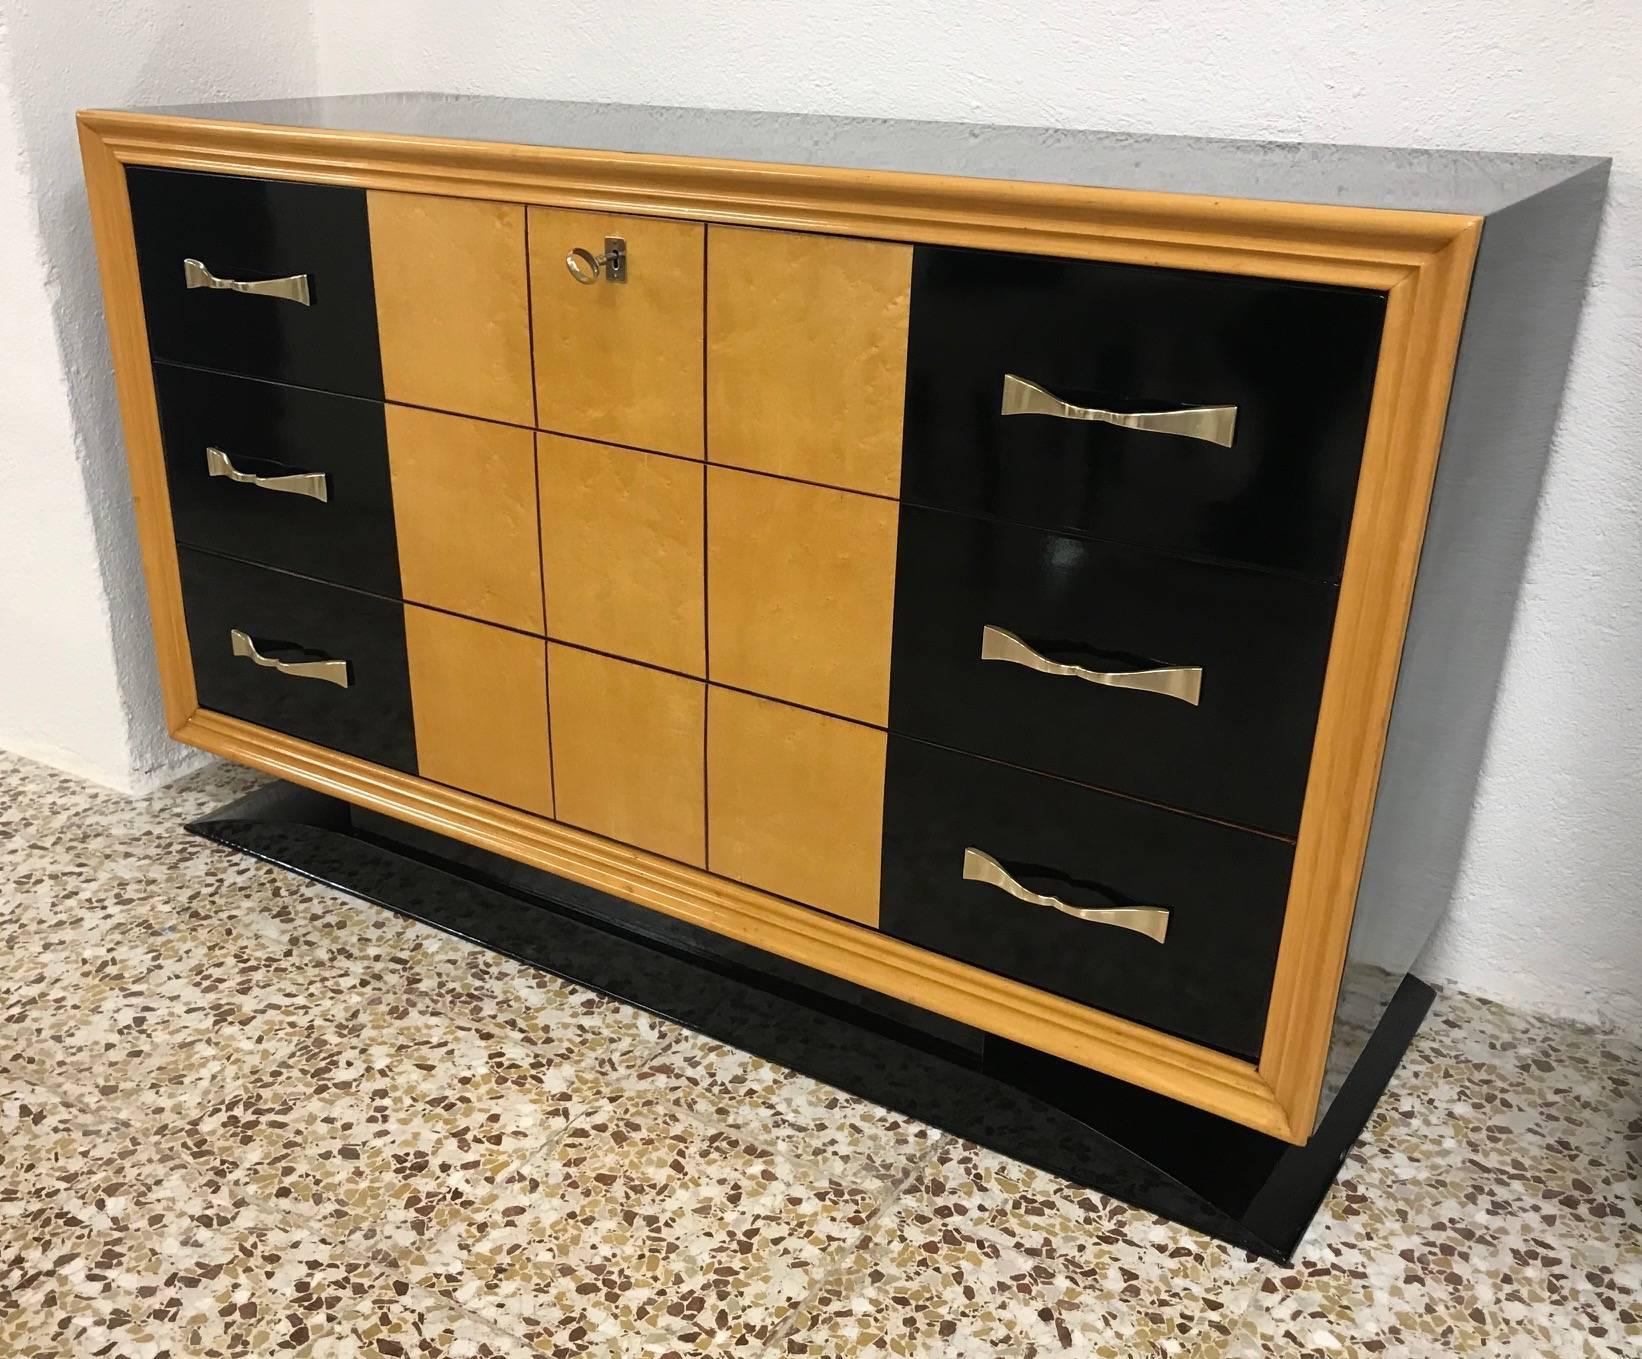 Fine Italian Art Deco dresser, drawers in black lacquer and maple.
The structure is made of black lacquered wood.
The elegant handles, the key and the nozzles are made of brass.